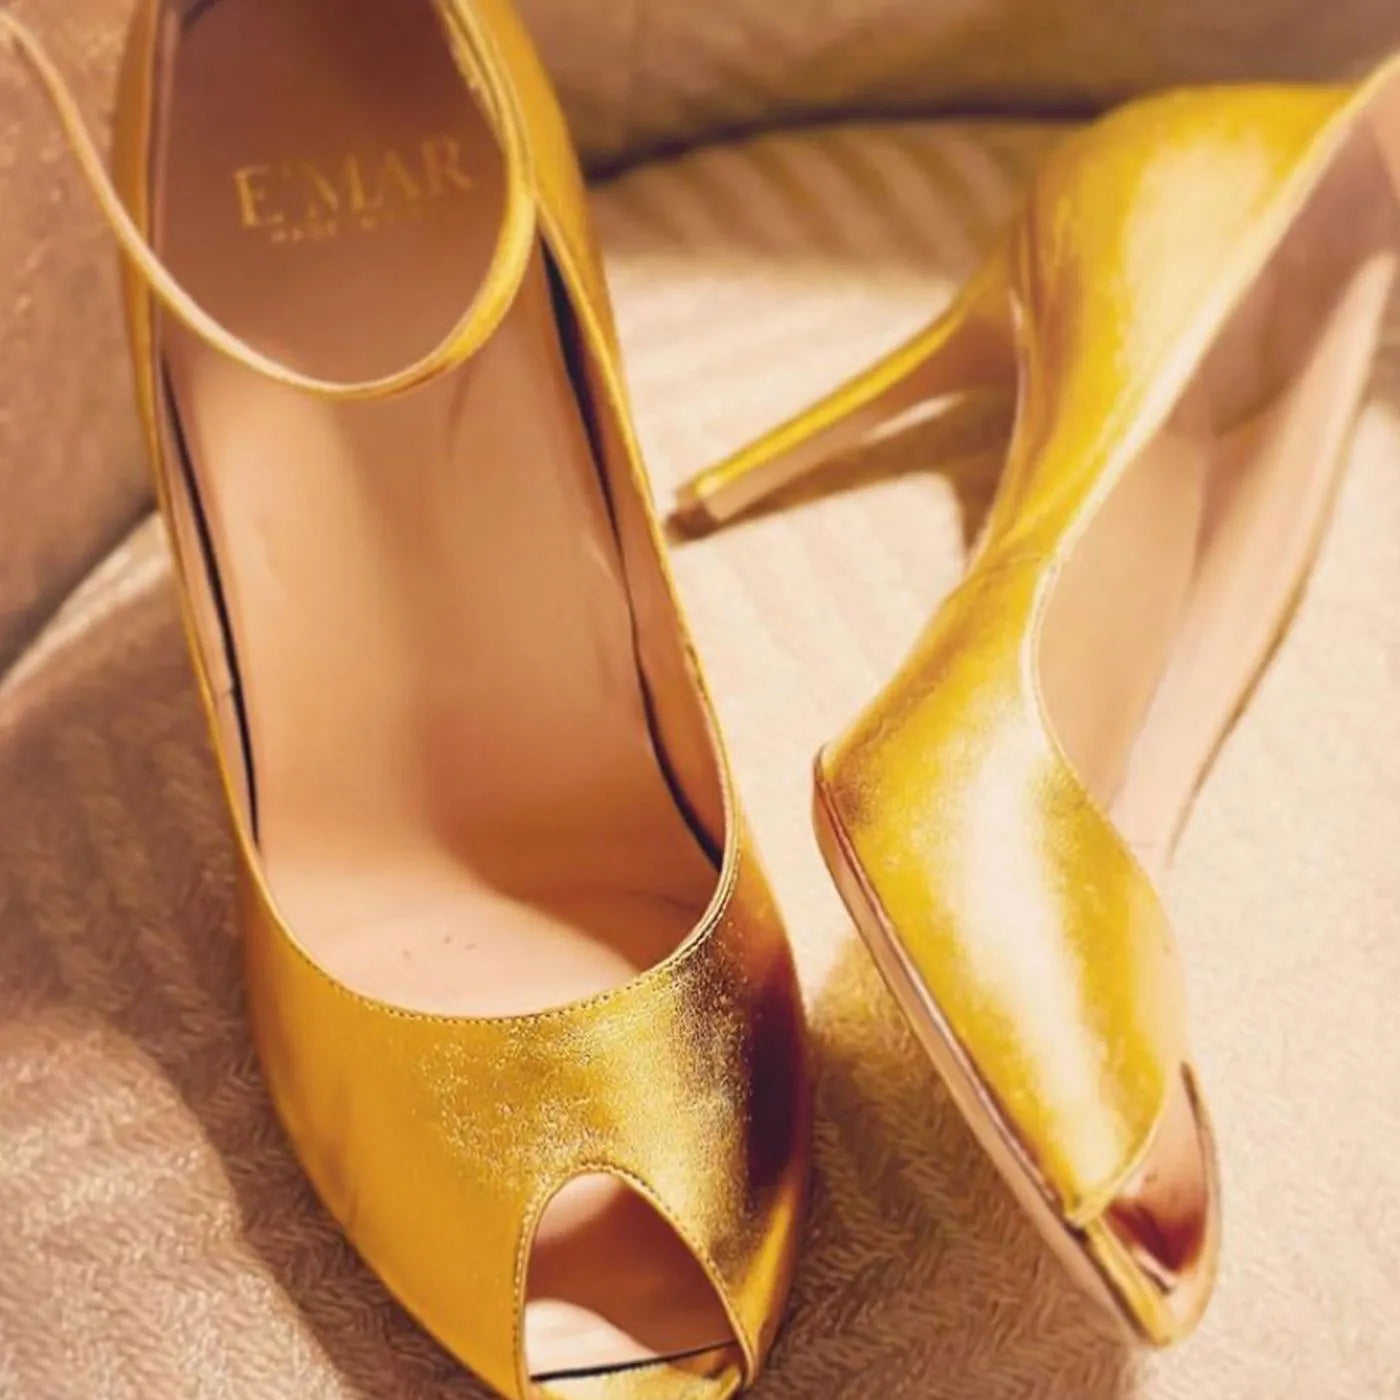 Buy The World's Most Expensive Shoes... Or These Gold Heels For Under £50 |  HuffPost UK Style